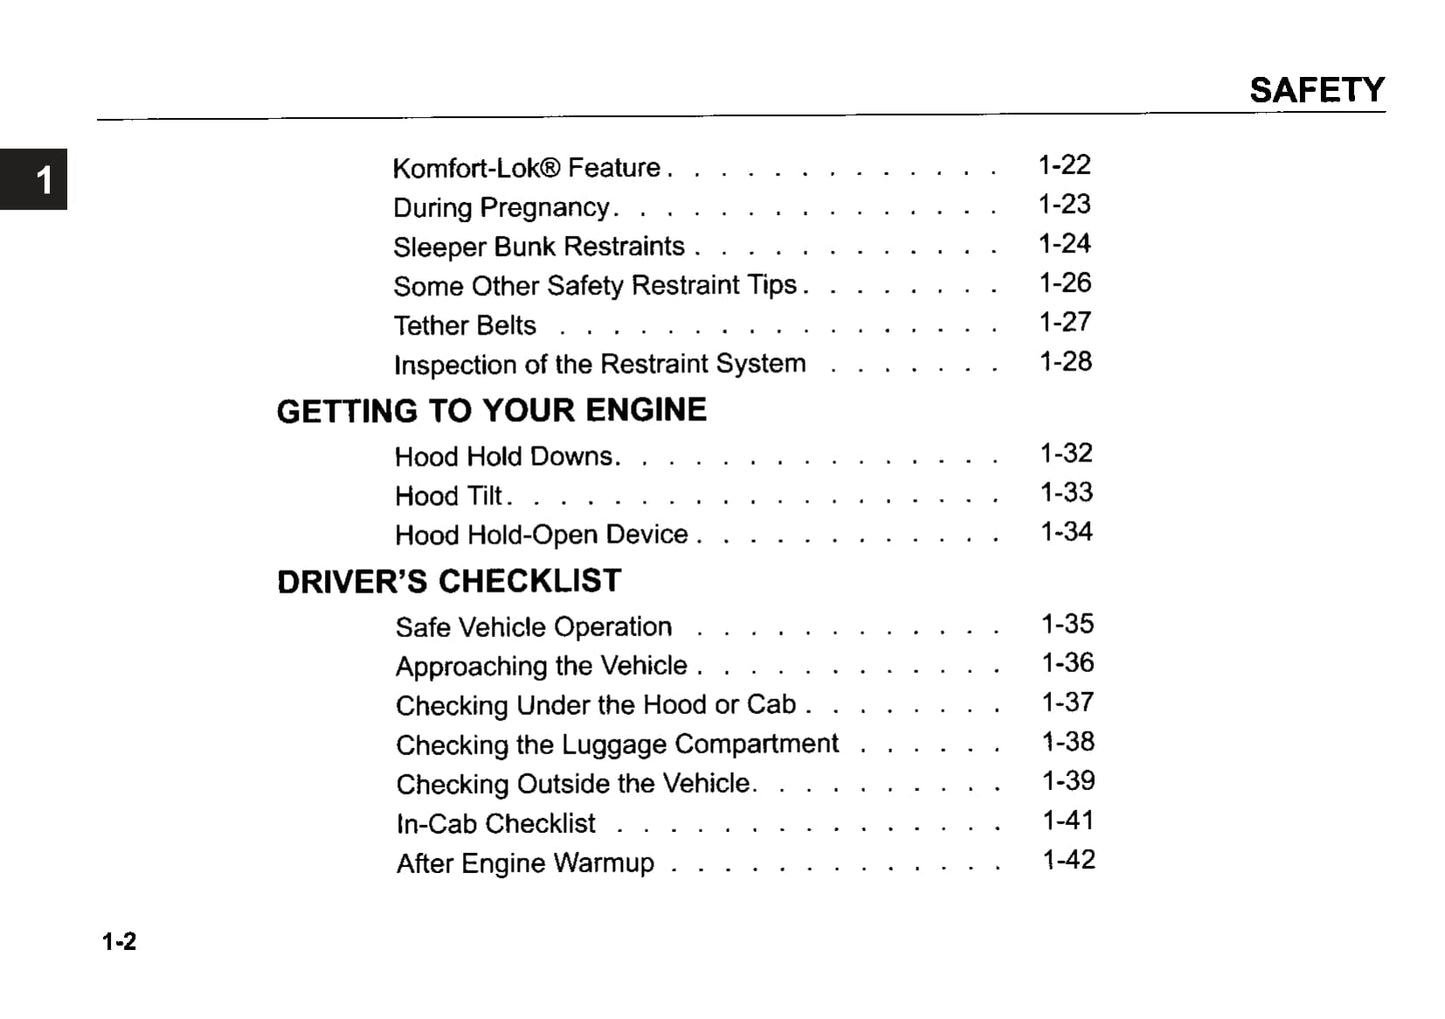 2011 Peterbilt Conventional Owner's Manual | English